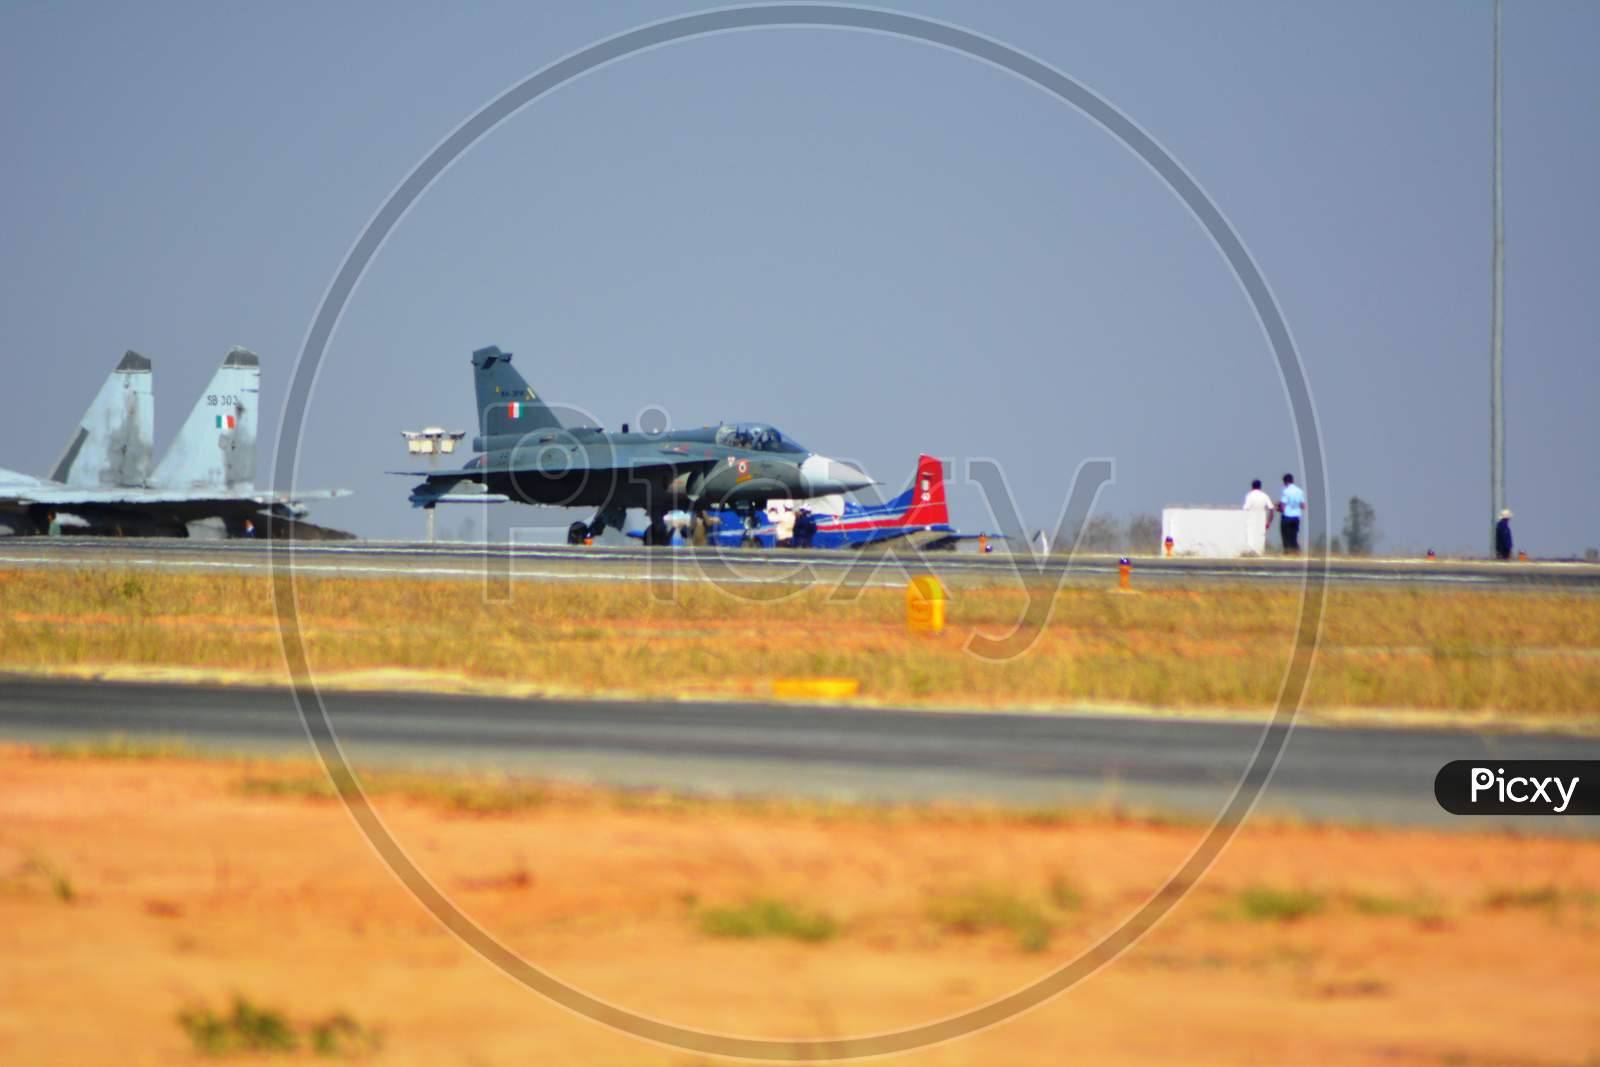 Tejas Light Combat Aircraft (LCA) about to take-off